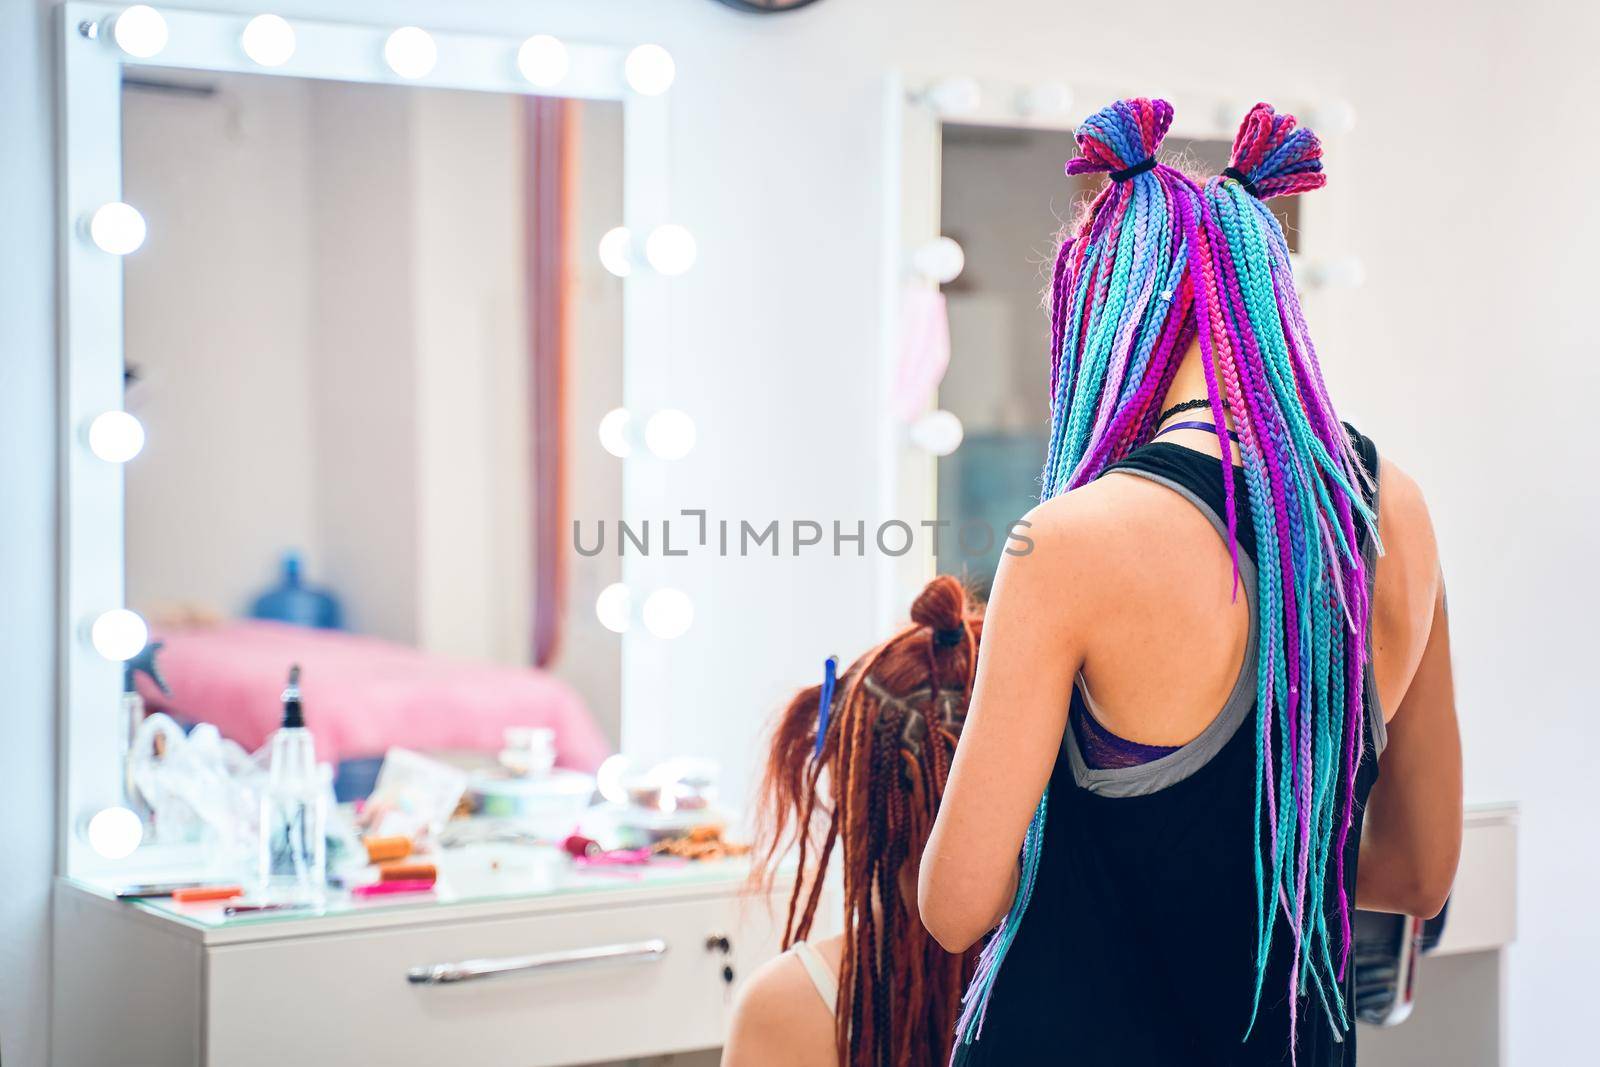 Back view of female barber with colored pigtails, who braids ginger dreadlocks to woman. Creative and fashionable hairstyle. Service in beauty salon. Large mirror with light bulbs on background.